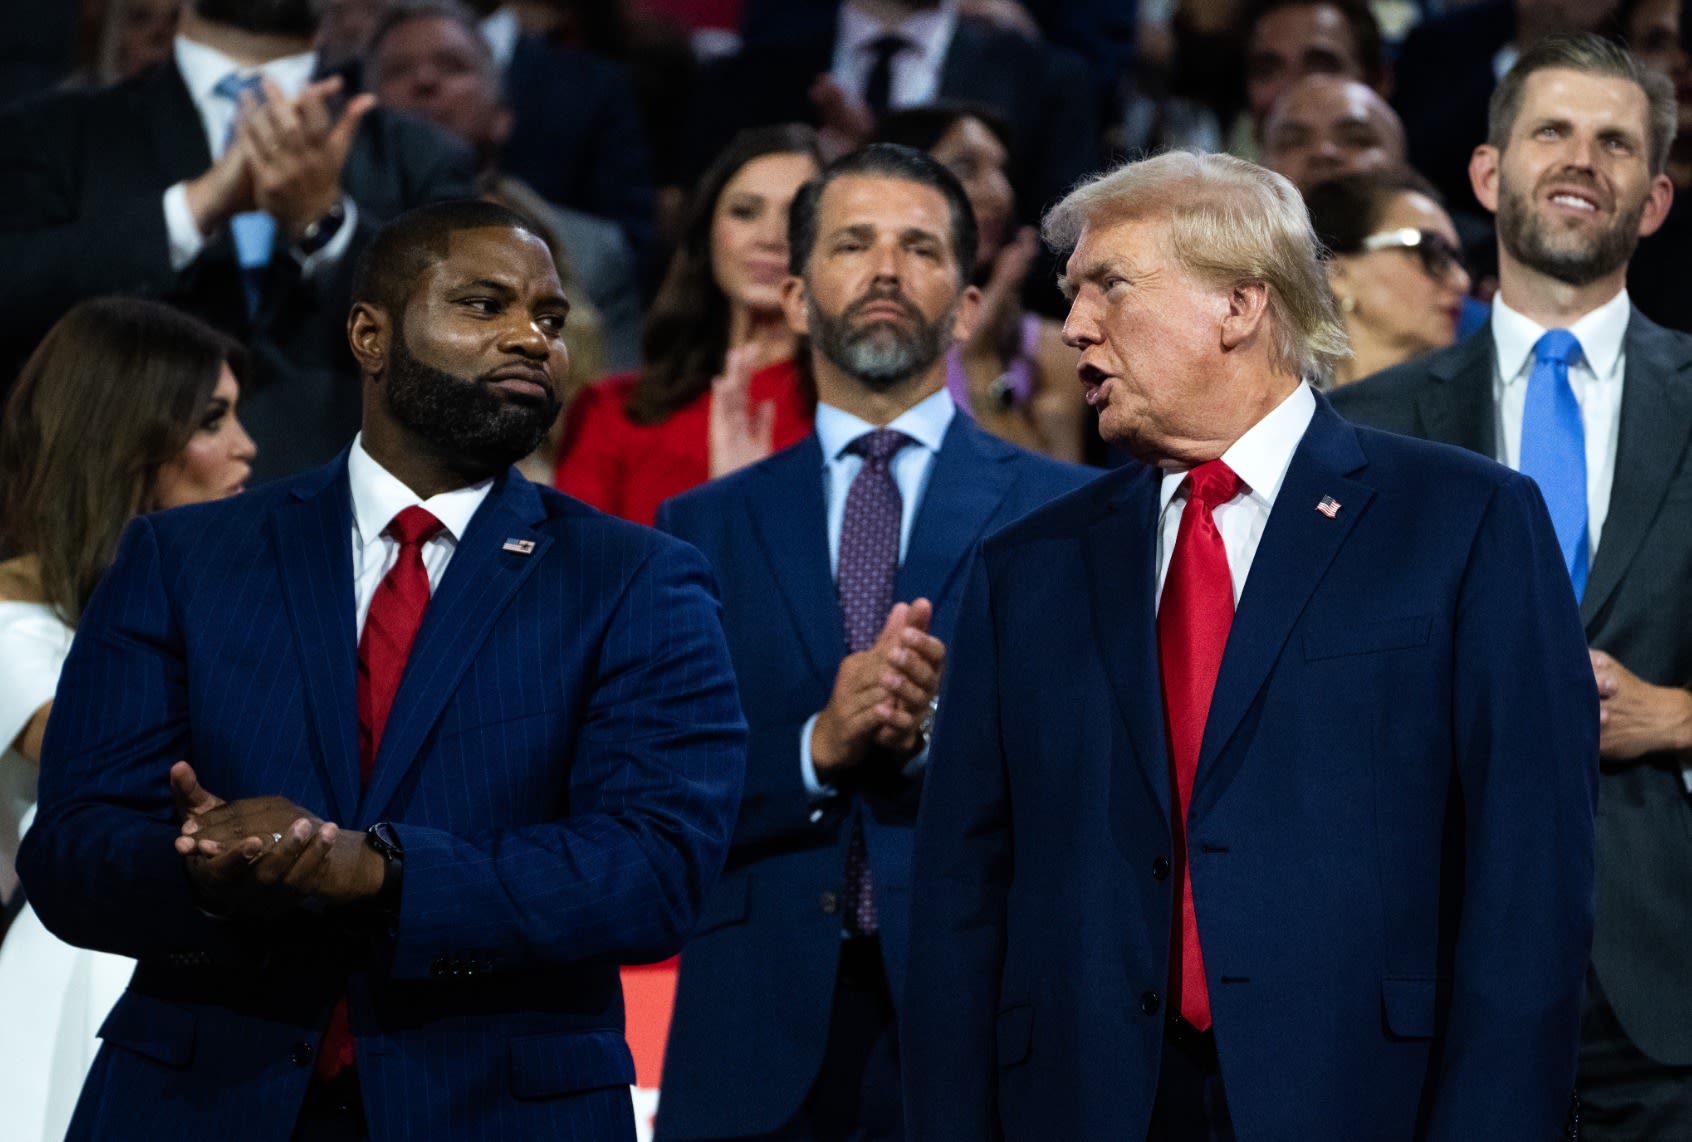 Trump and his MAGA allies are courting Black voters — but expert says "no one's falling for that"